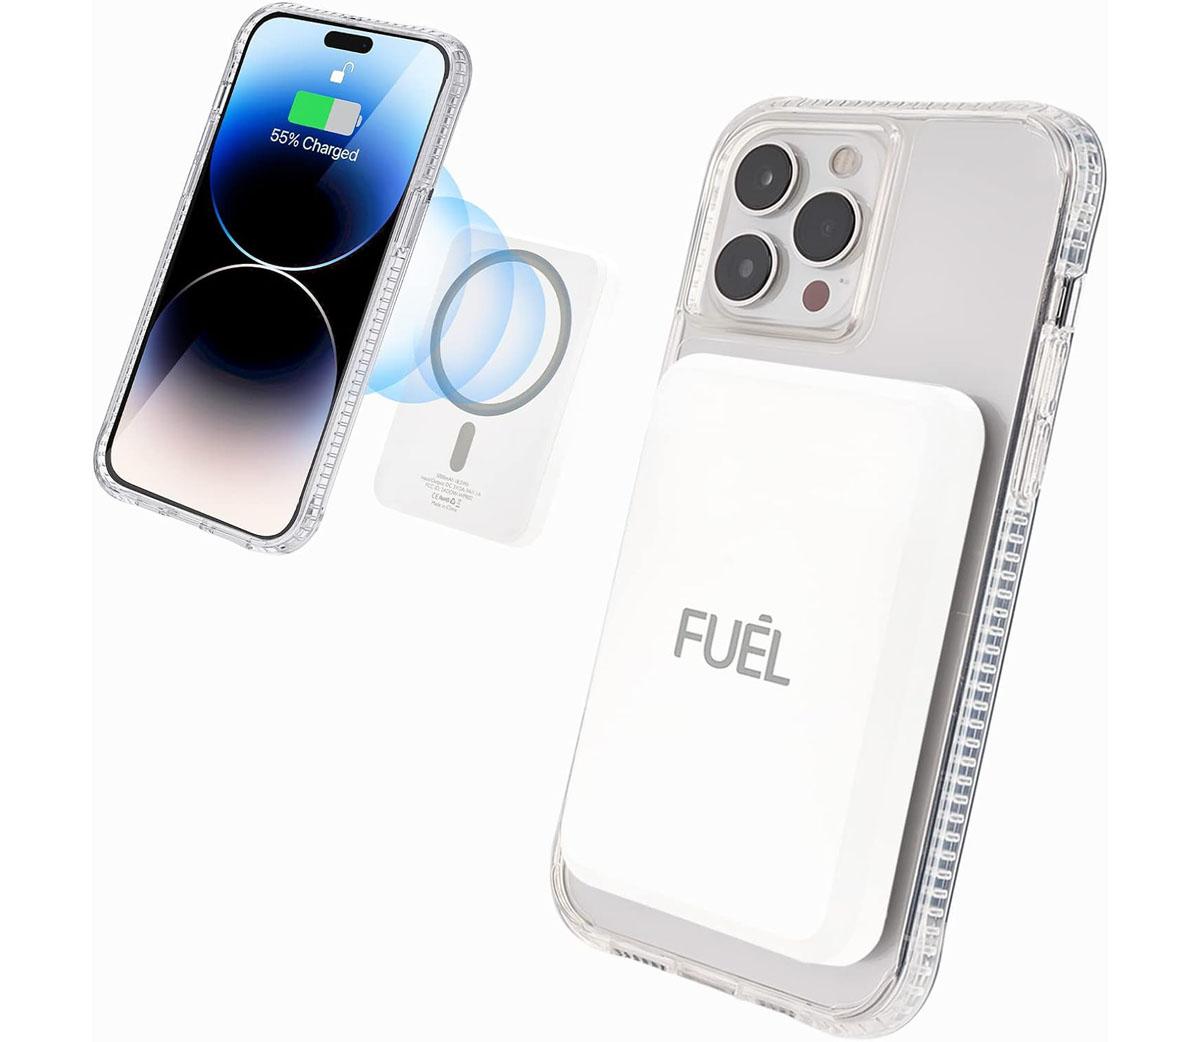 iPhone Fuel 5000 mAh Magnetic Wireless Portable Charger for $30.76